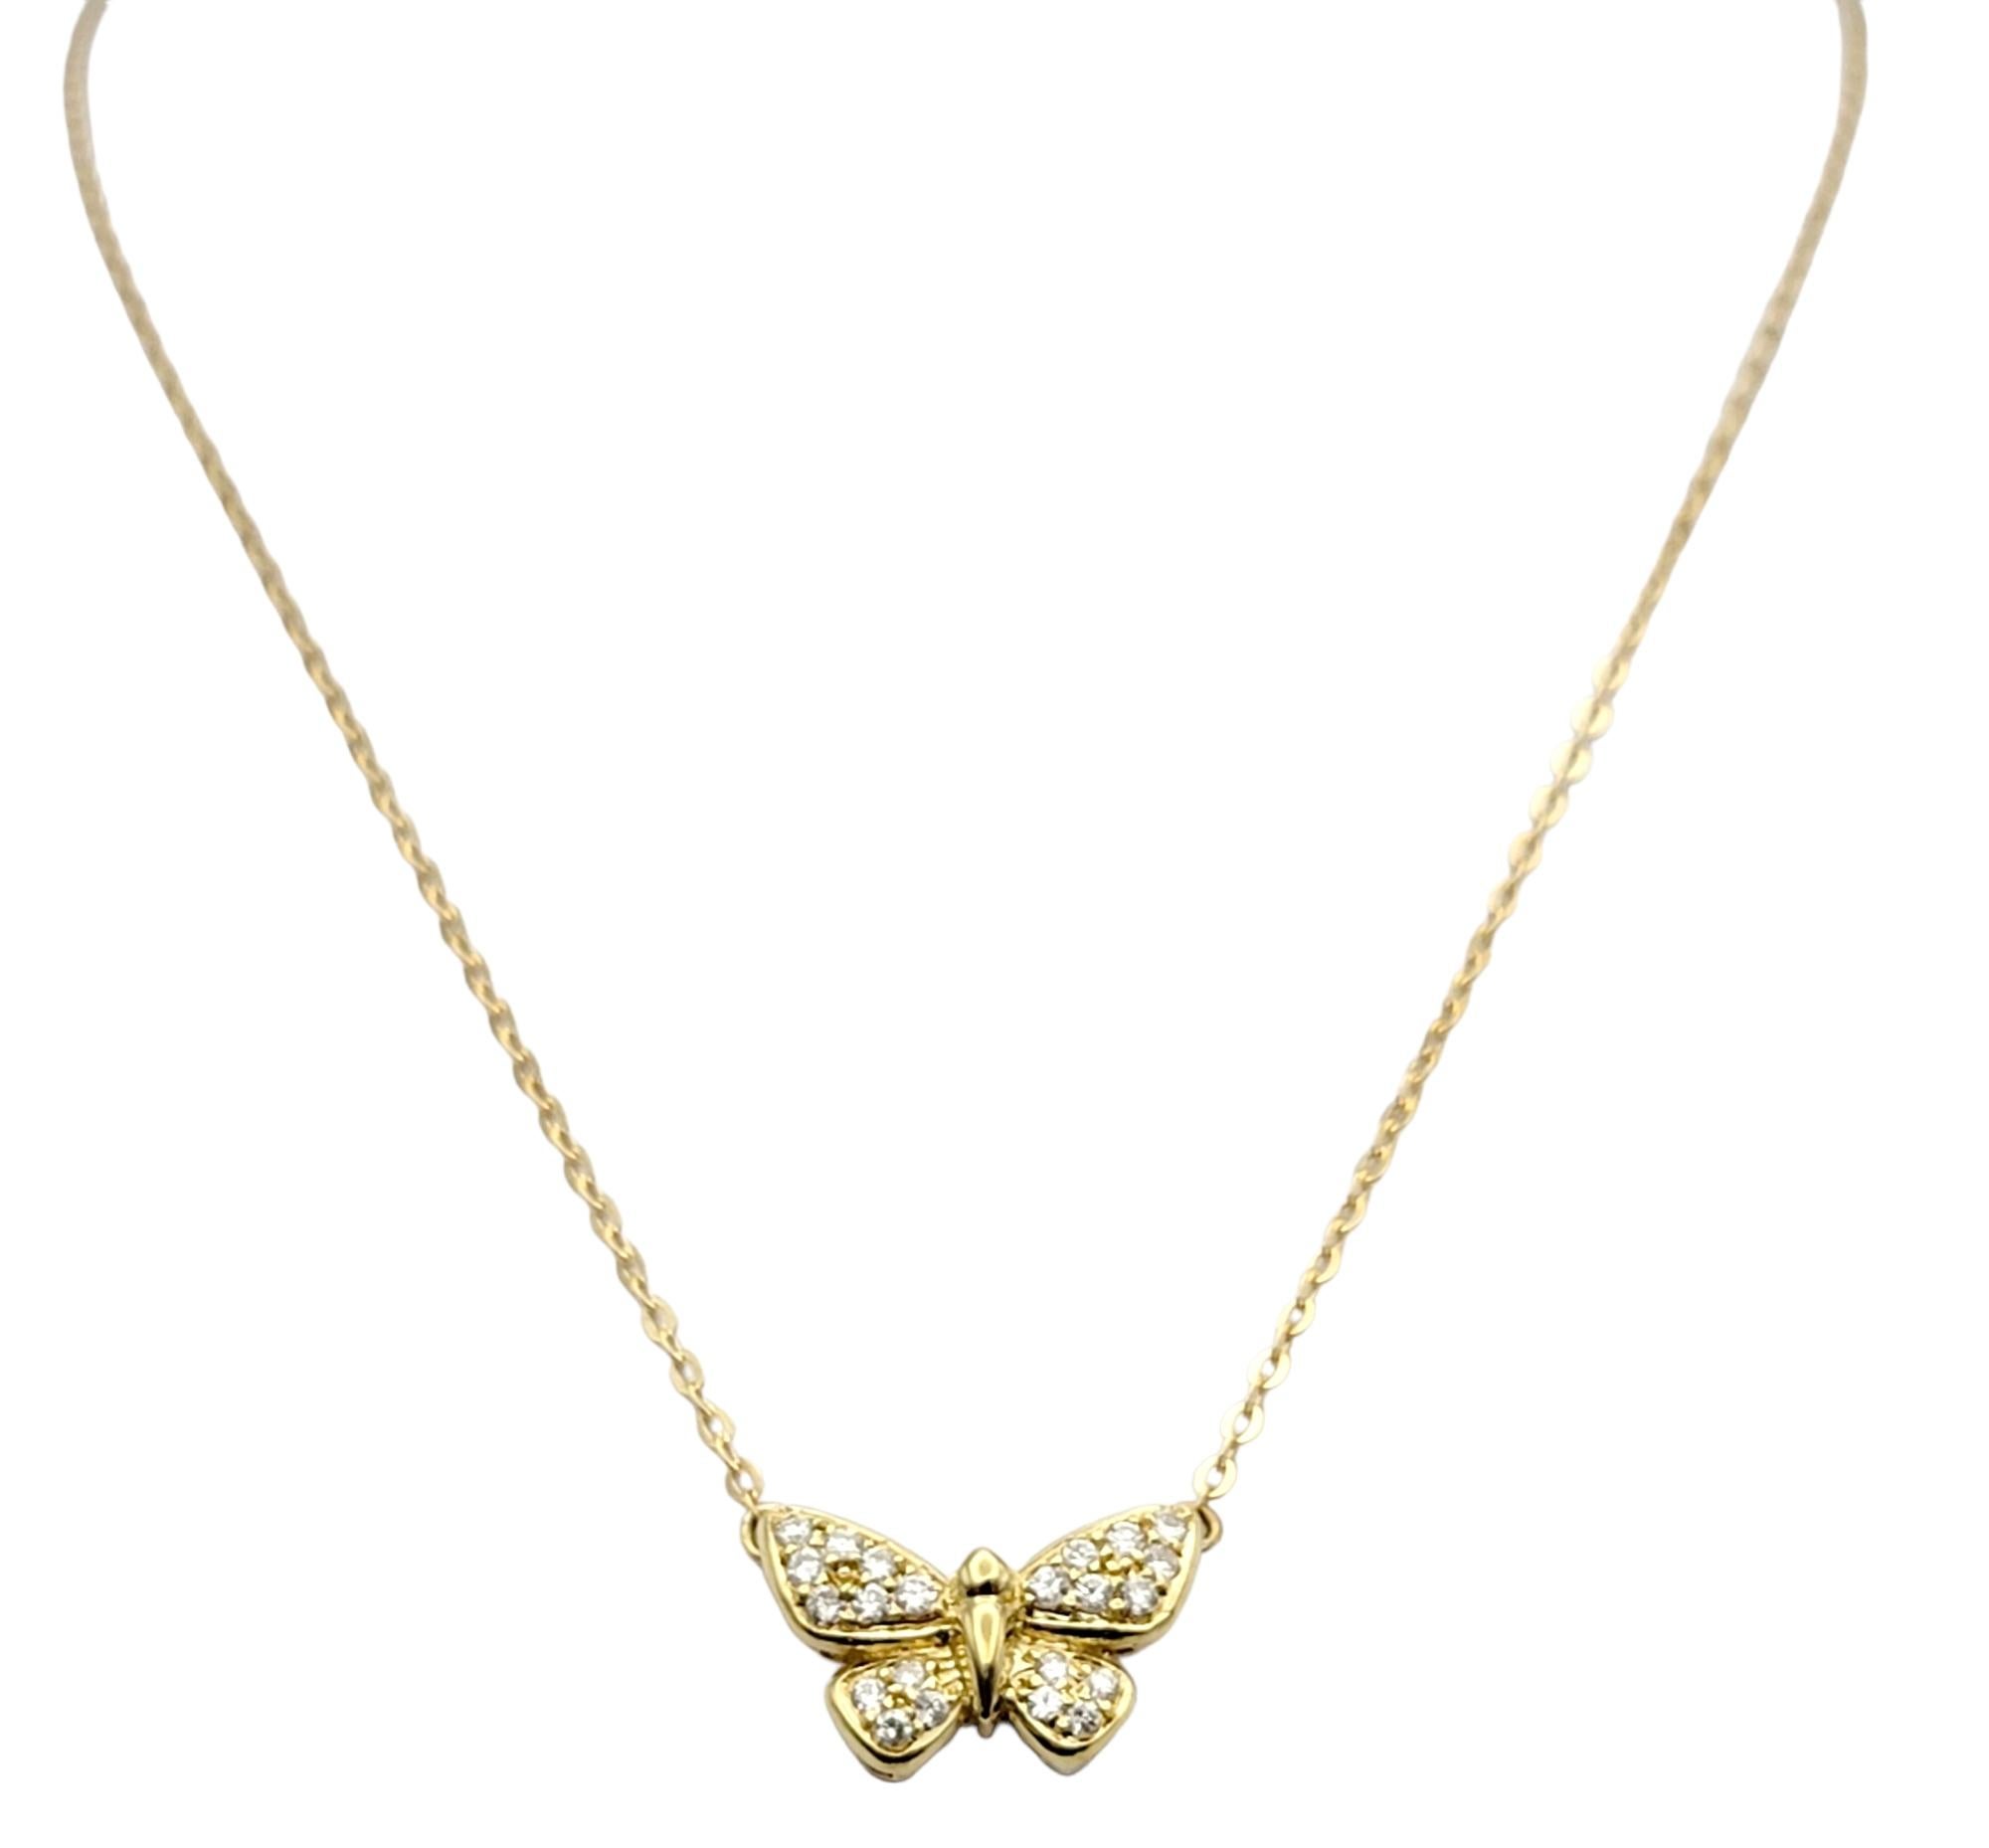 18 Karat Yellow Gold Pave Diamond Butterfly Pendant Necklace In Good Condition For Sale In Scottsdale, AZ